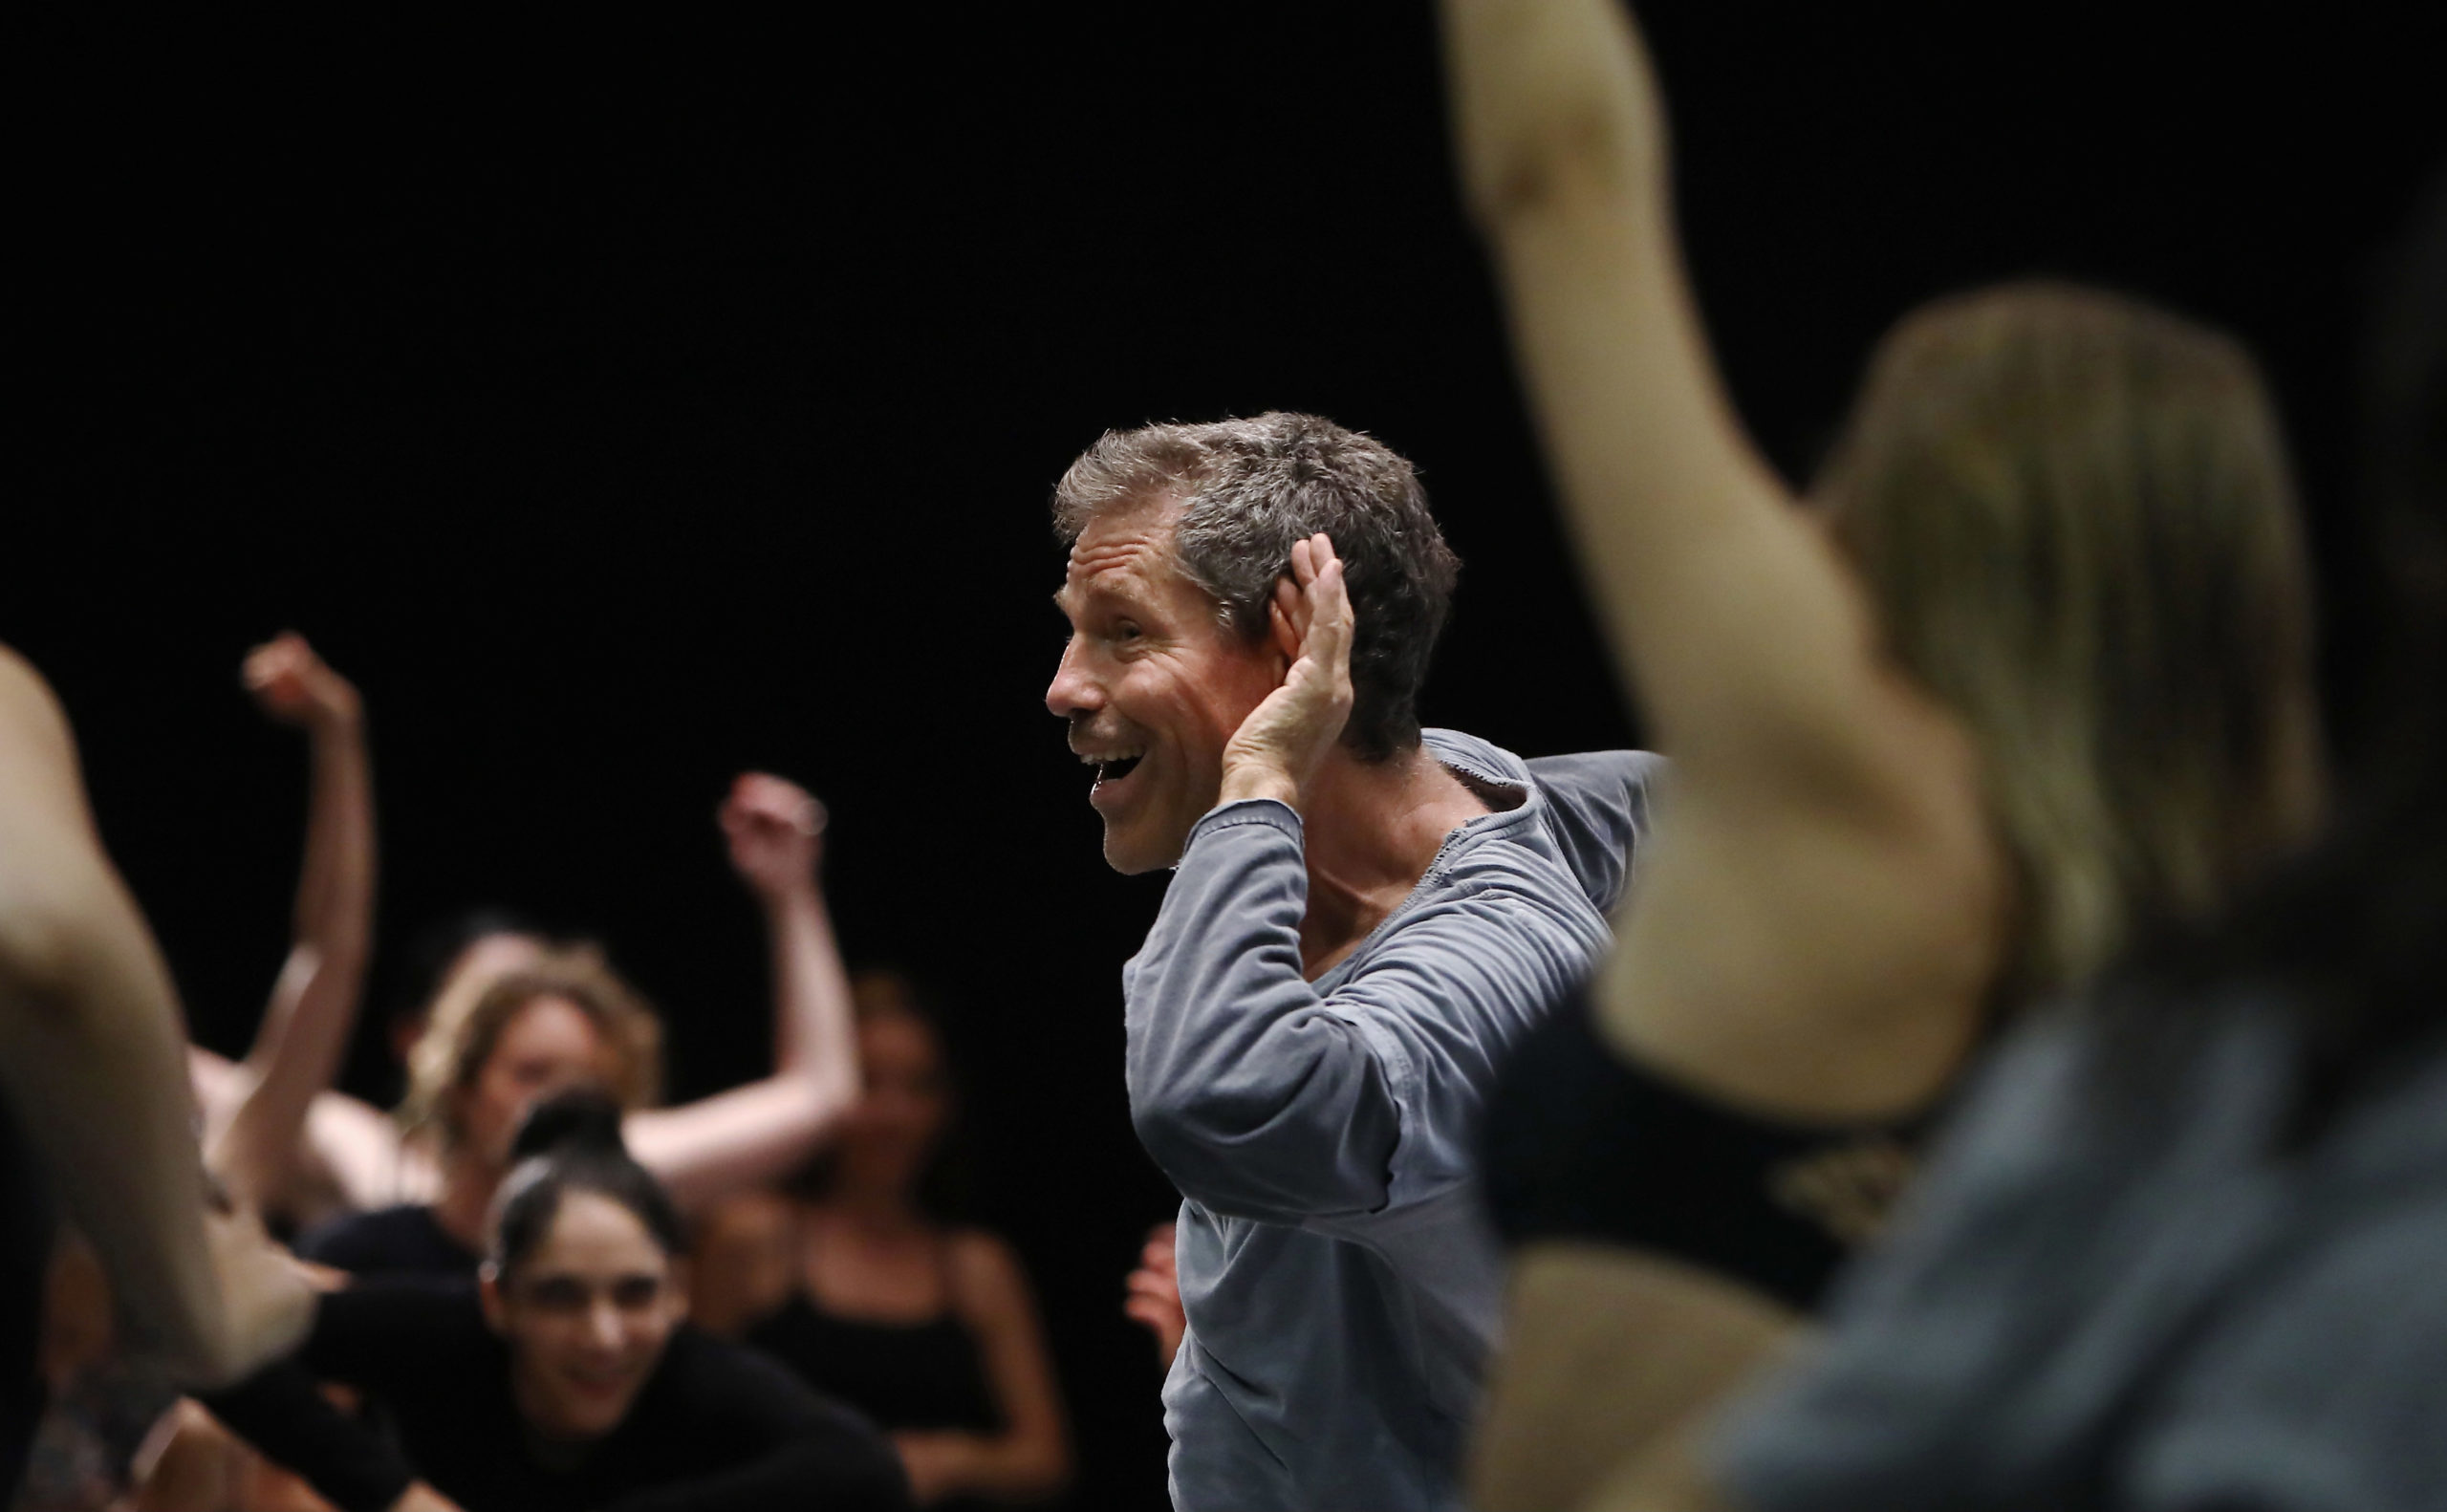 Ohad Naharin holds a hand to his ear, mouth open, surrounded by dancing bodies